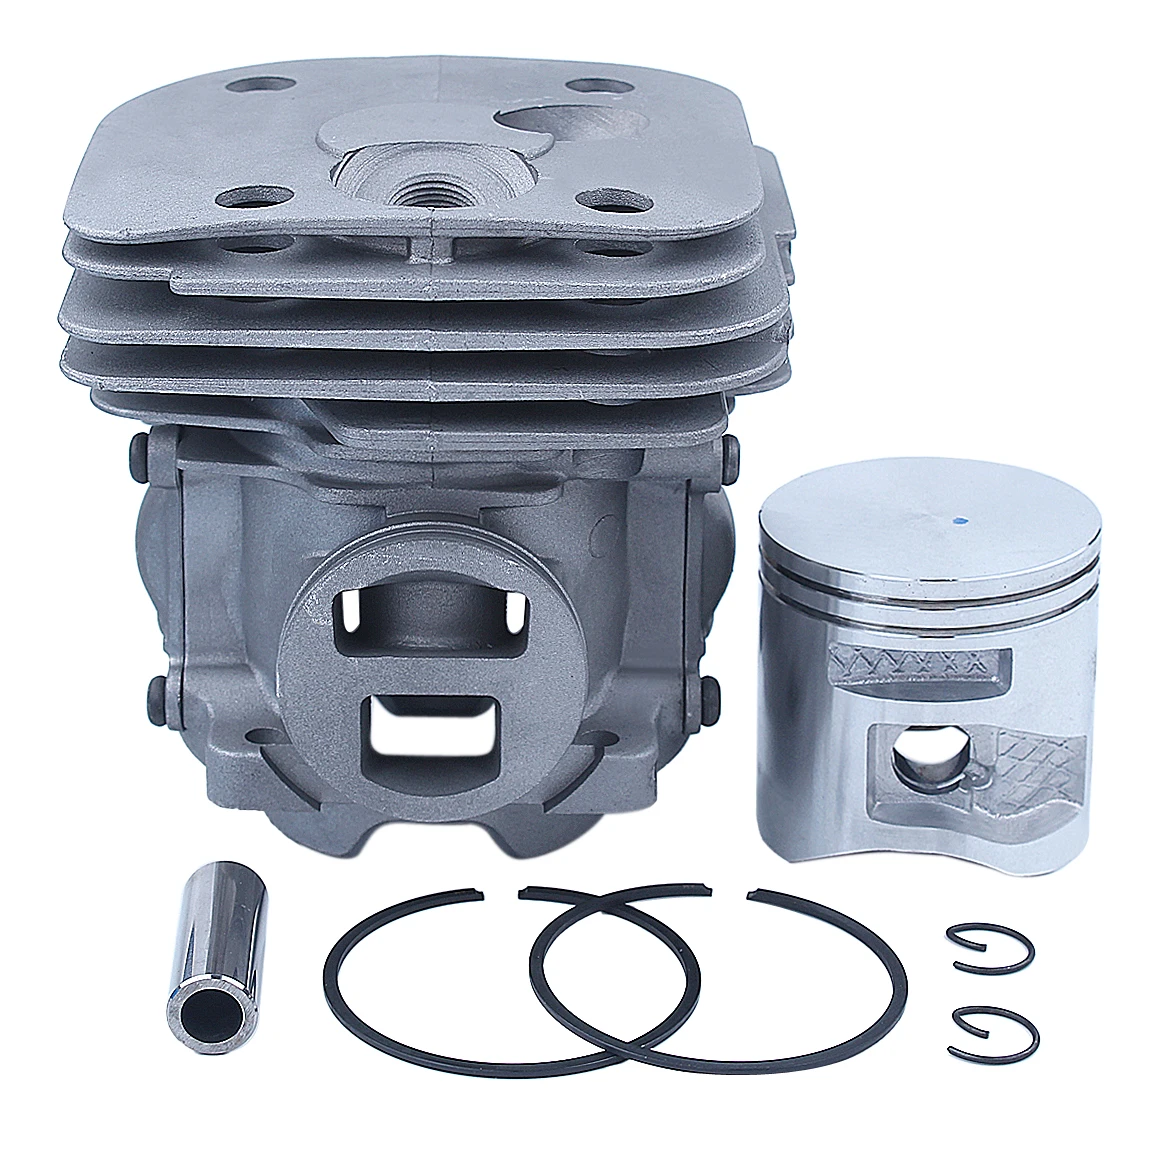 

50mm Cylinder Piston Kit For Husqvarna 372XP 372 365 X-TORQ Chainsaw Spare Replacement Tool Part 575255702